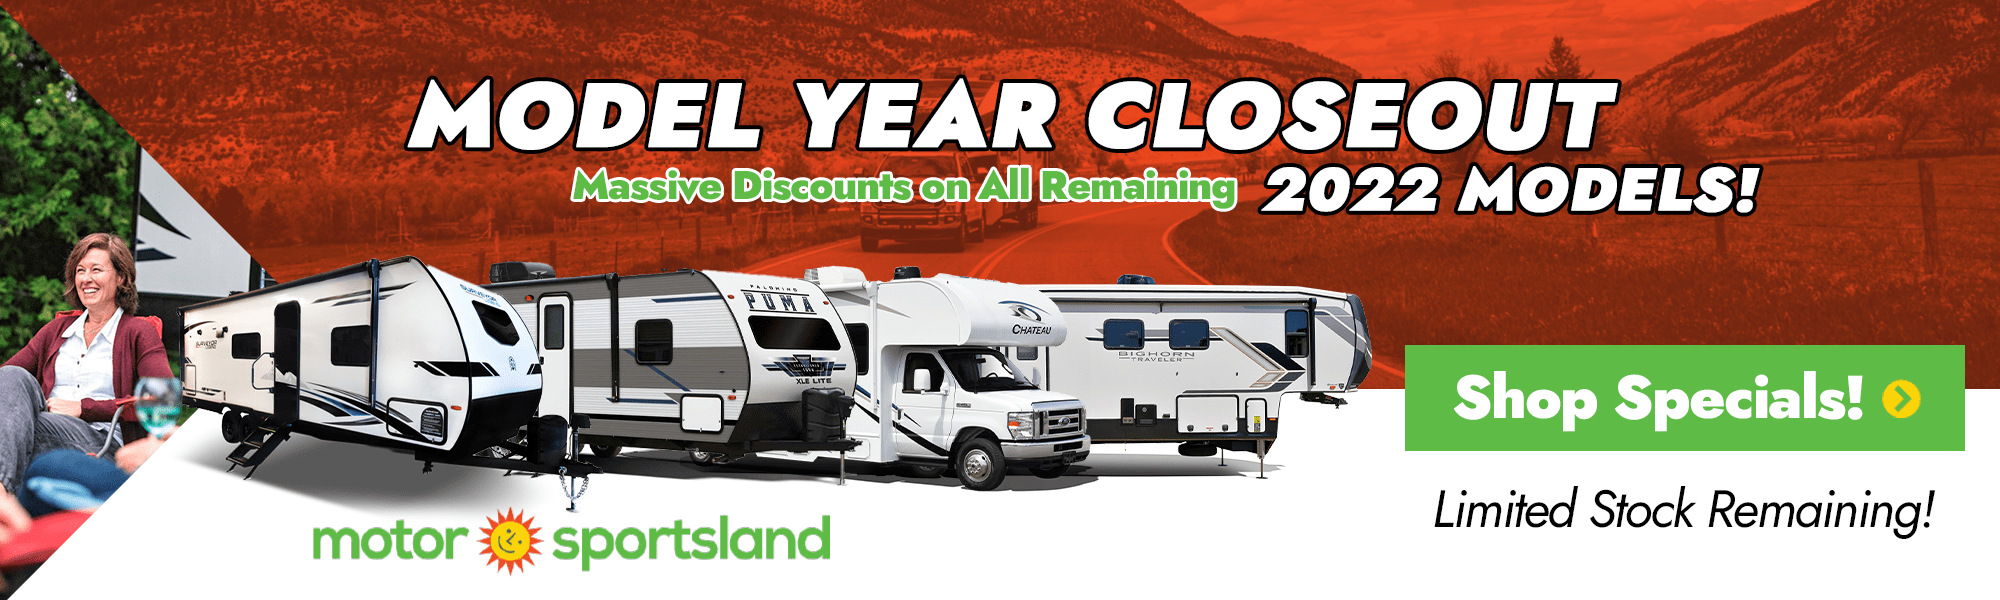 Model Year End Closeout